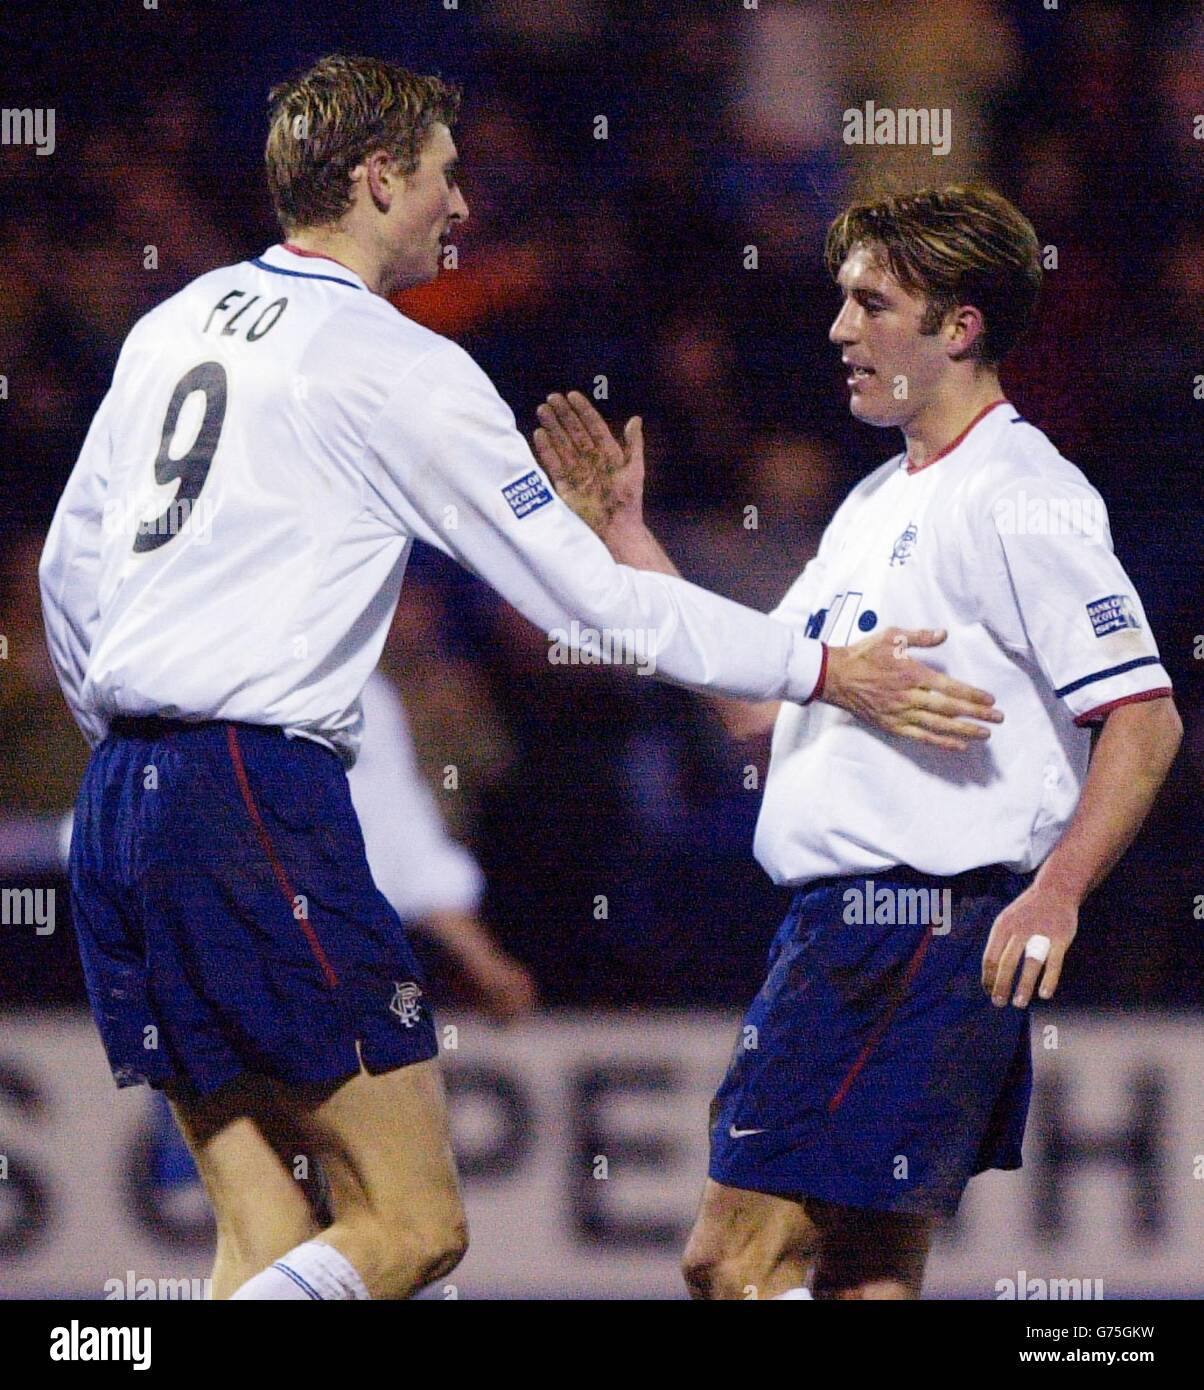 Rangers' Fernando Ricksen (right) celebrates his goal against St Johnstone with fellow goalscorer Tore Andre Flo during the Bank of Scotland premiership match at McDiarmid Park in Perth. Stock Photo